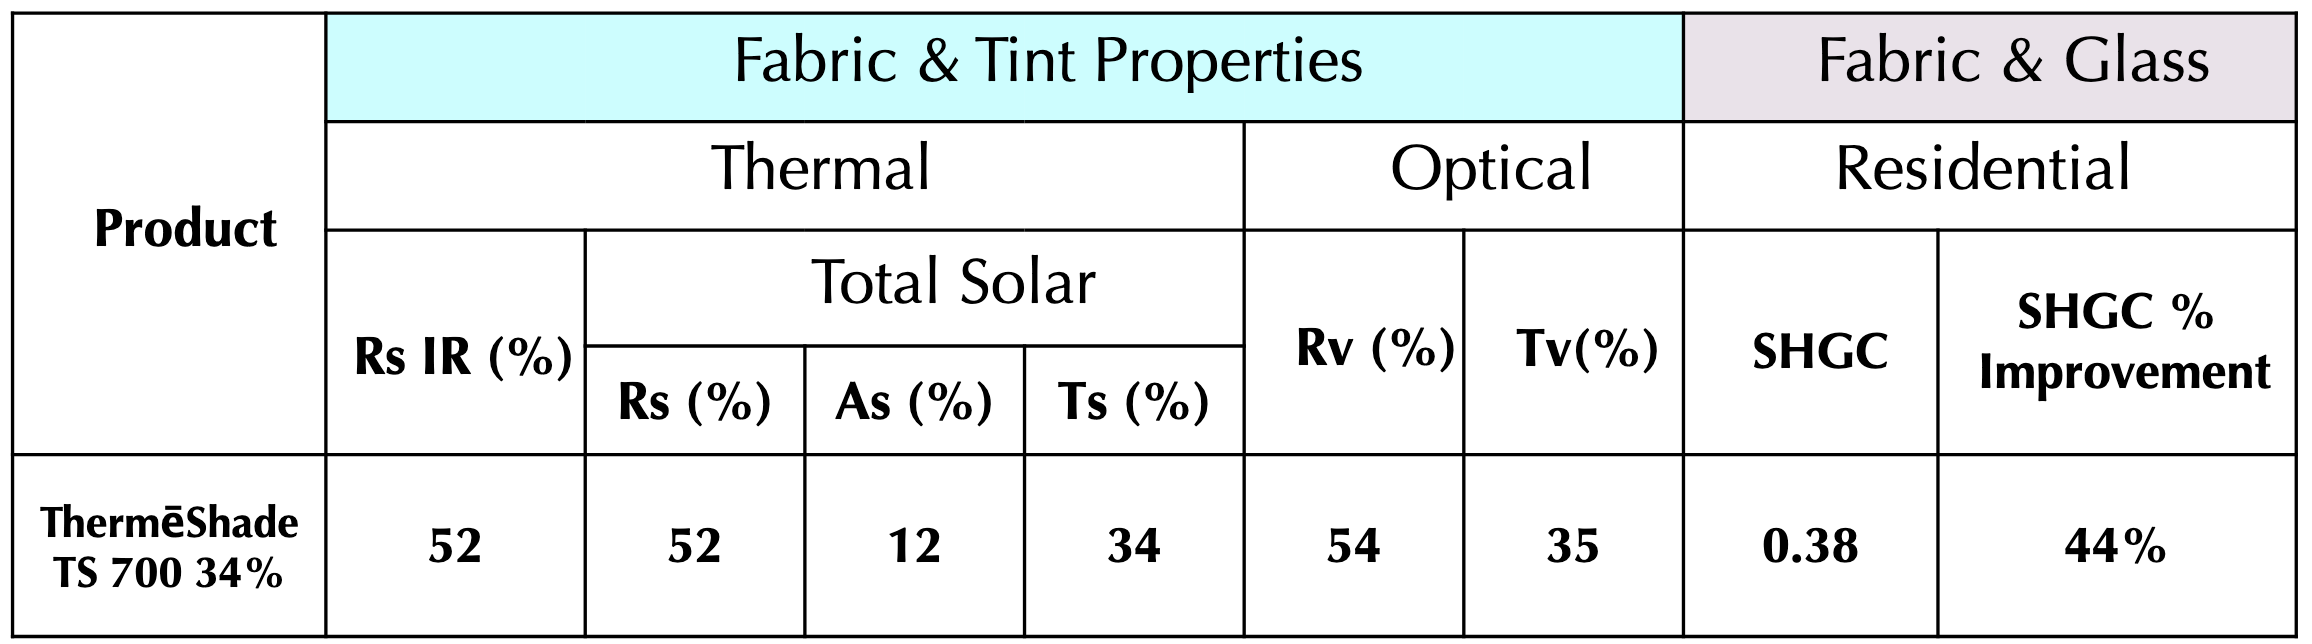 ThermeShade solar / thermal /optical properties data table